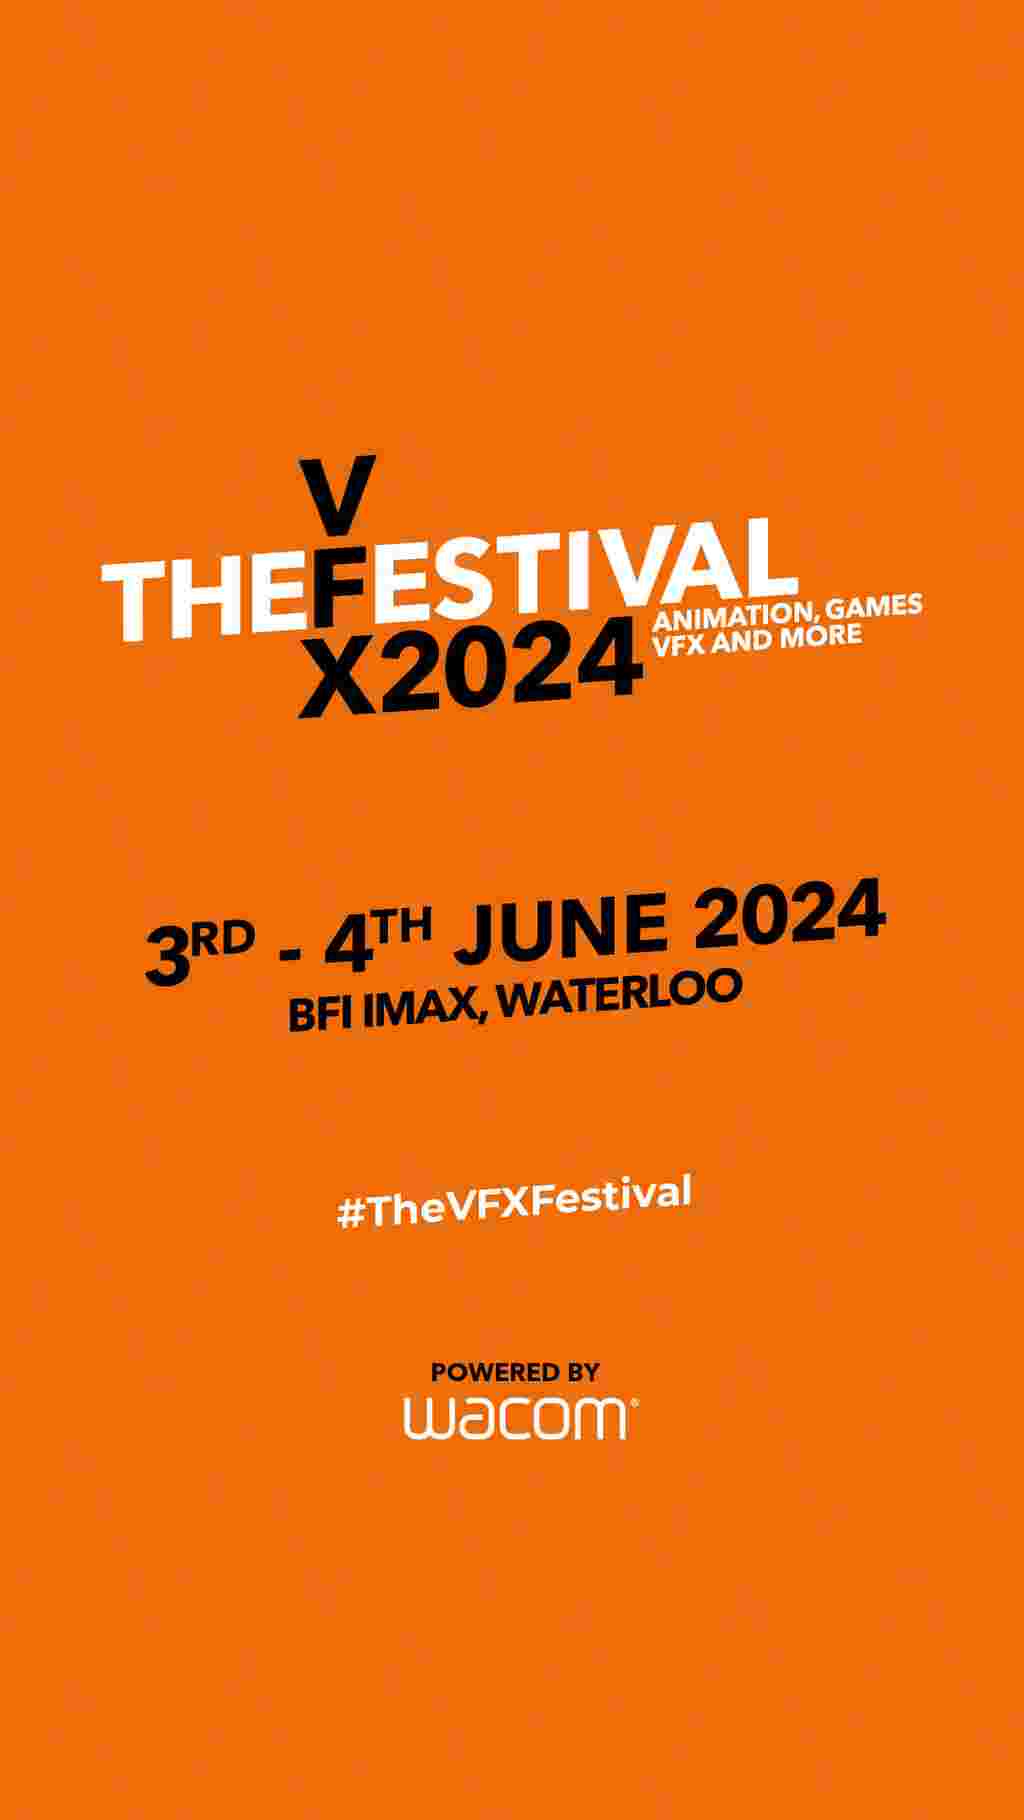 The VFX Festival 2024 - Animation, Games, VFX and more. 3rd-4th June 2024. BFI IMAX, Waterloo. #TheVFXFestival. Powered by Wacom